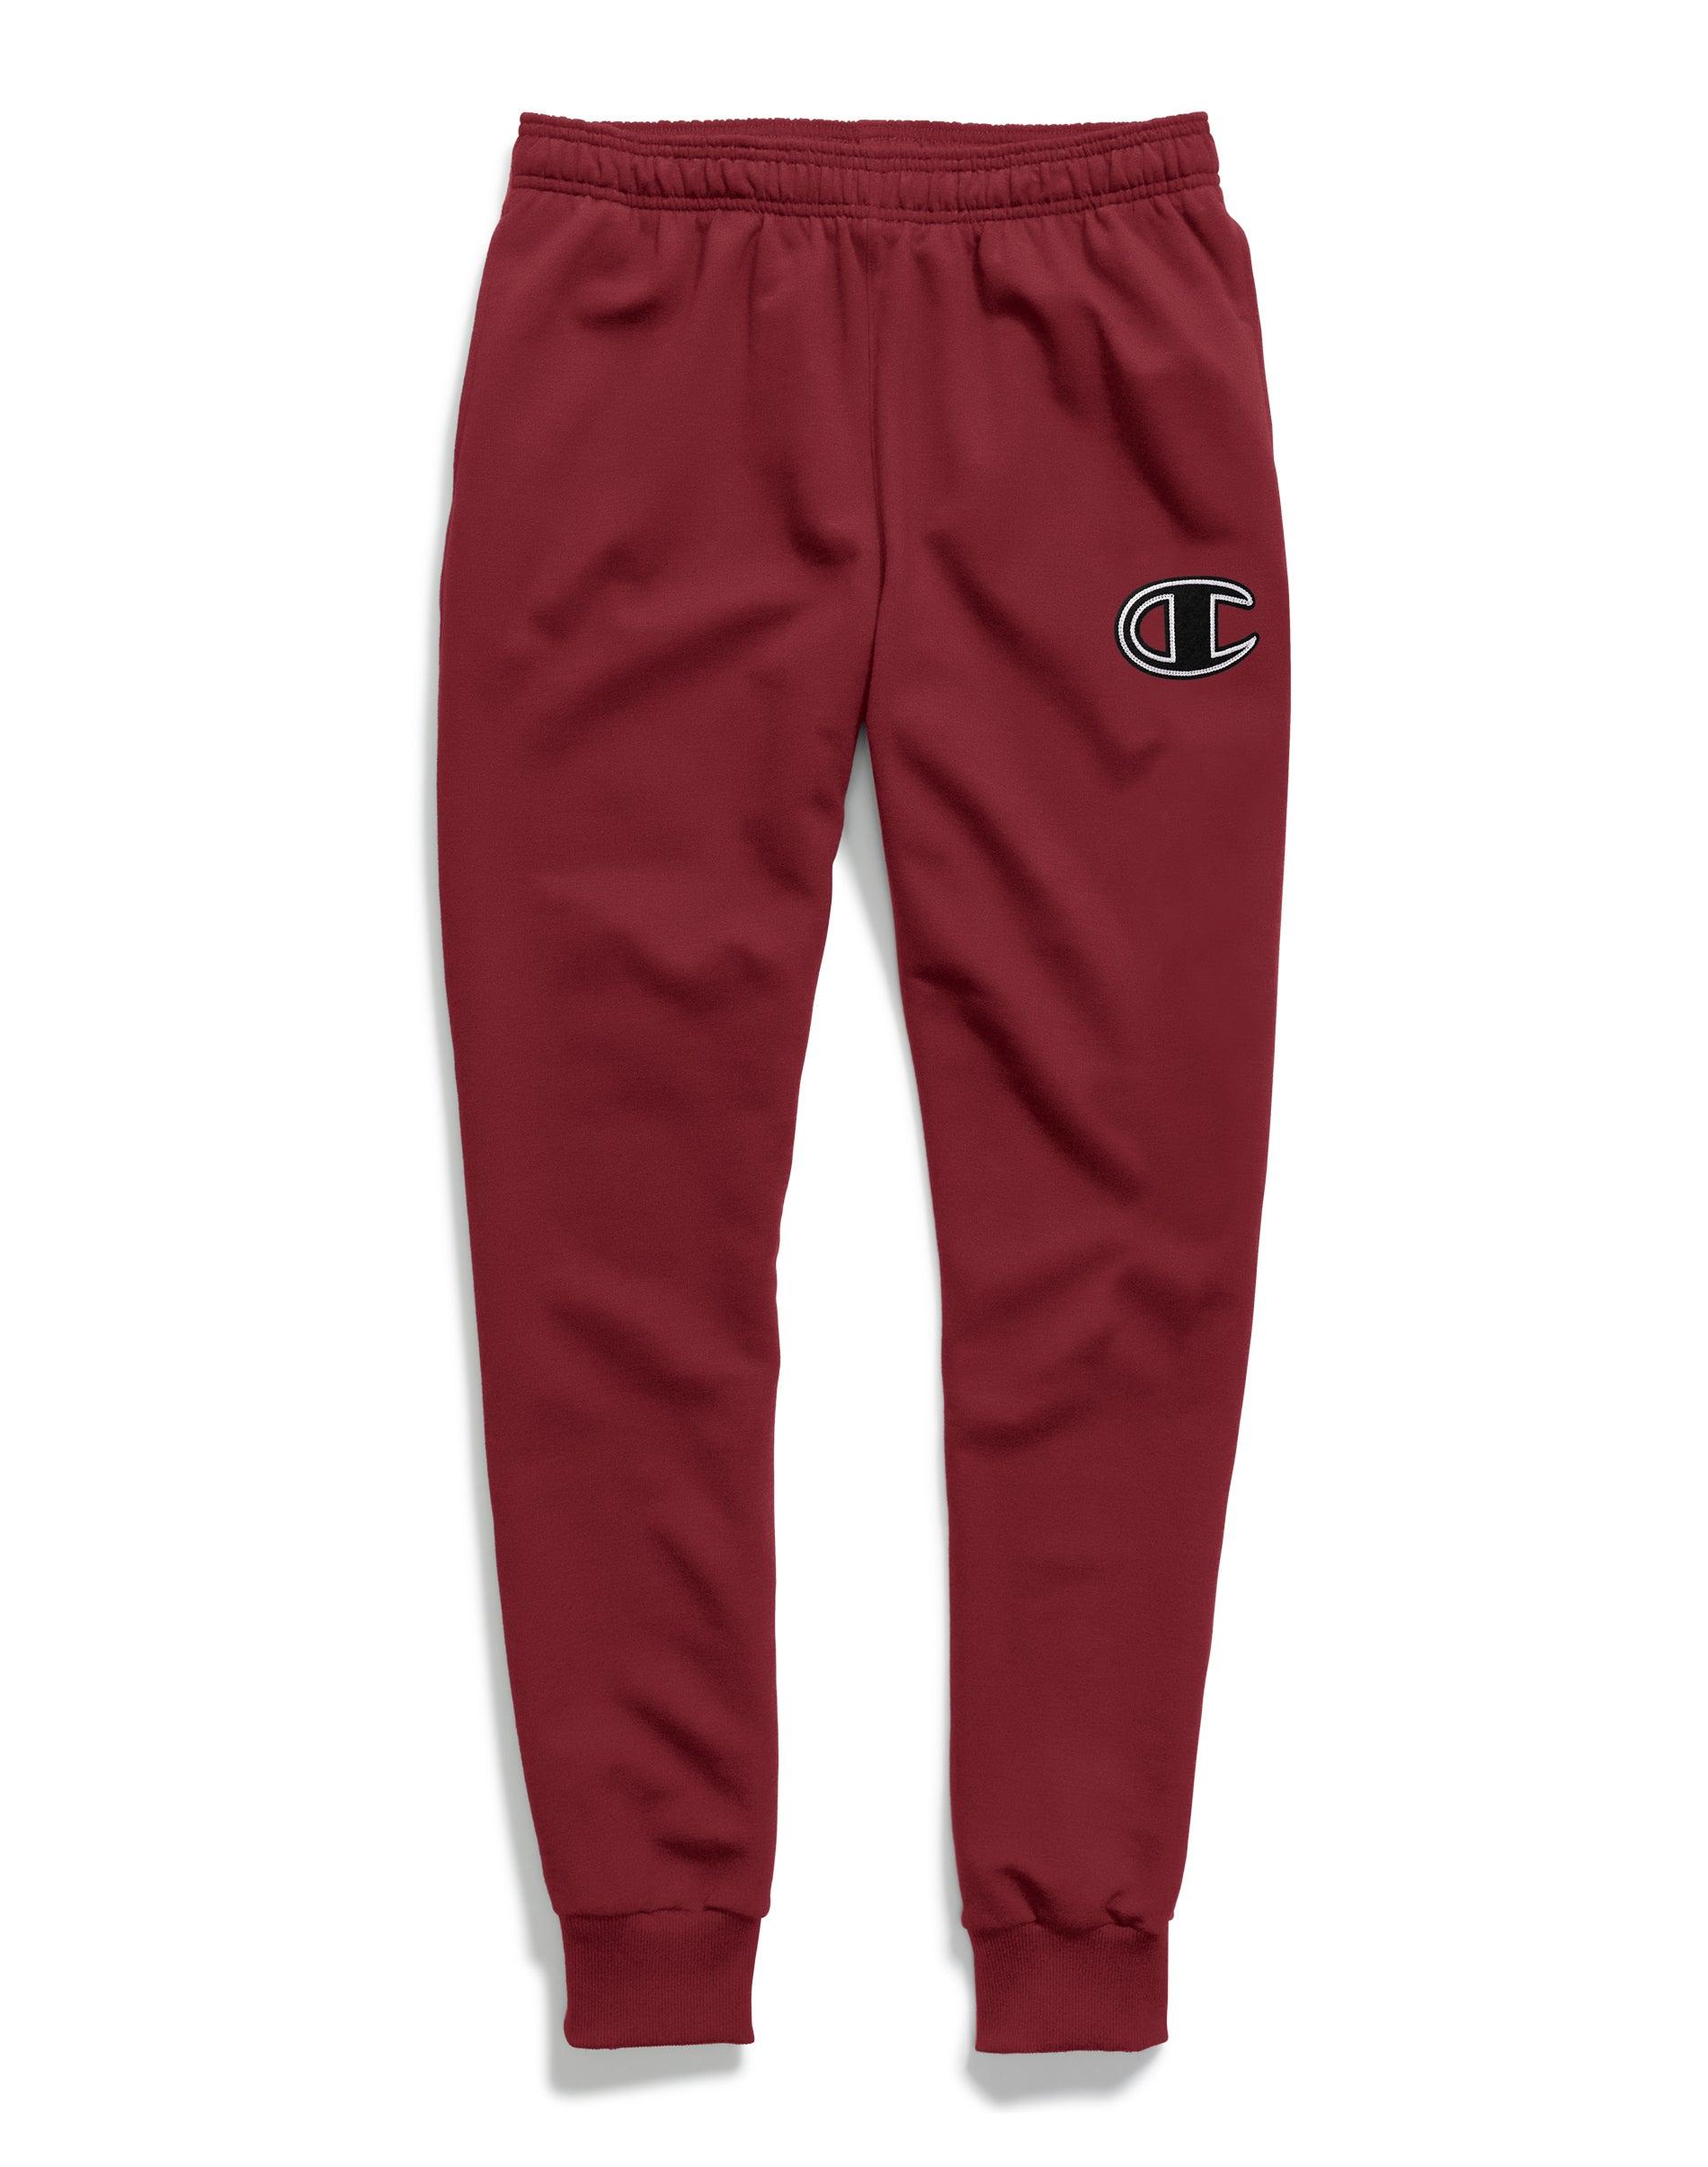 Champion Athletics Powerblend Fleece Joggers in Red for Men - Lyst